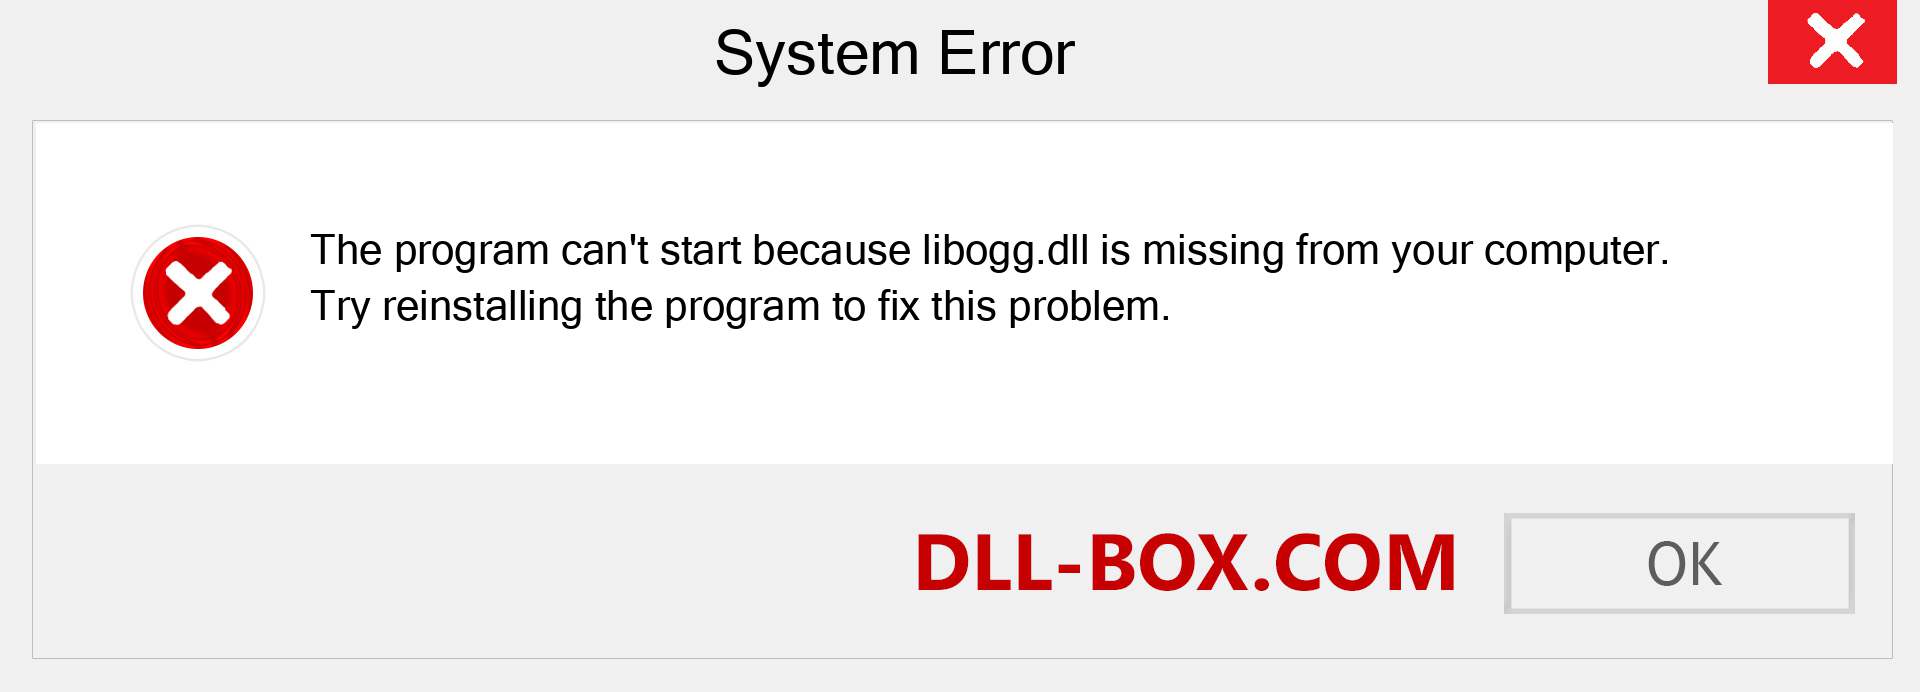  libogg.dll file is missing?. Download for Windows 7, 8, 10 - Fix  libogg dll Missing Error on Windows, photos, images